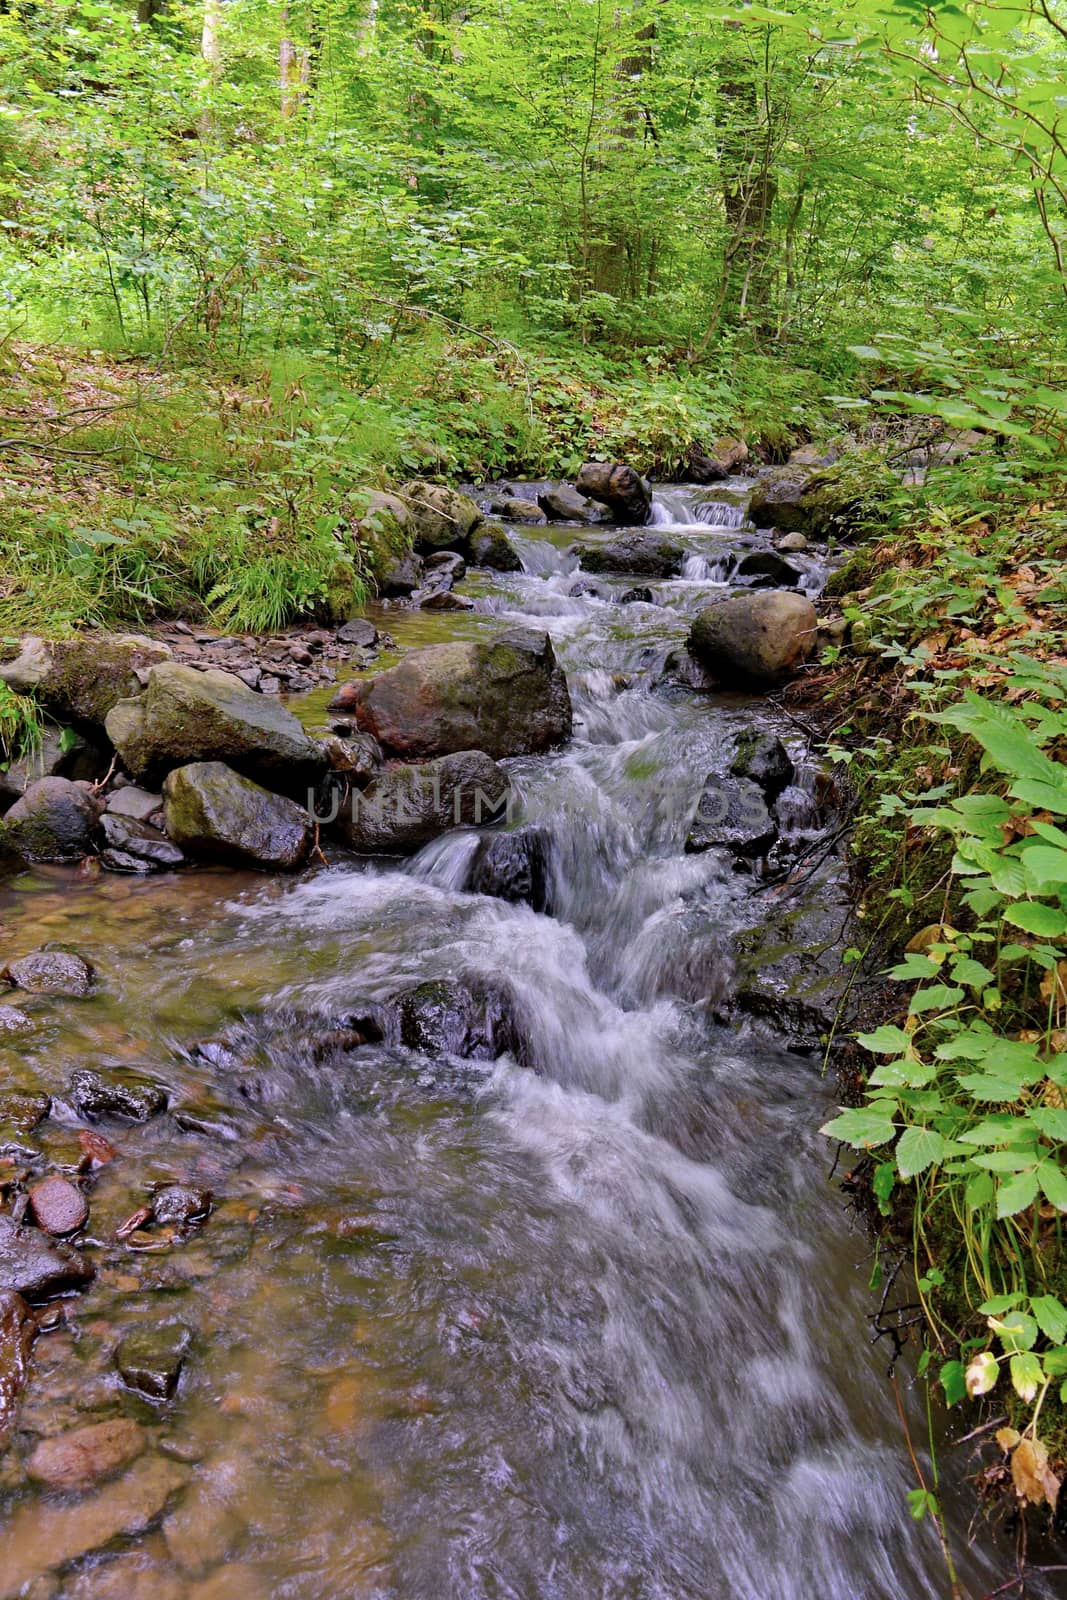 the mountain stream rapidly carries water to the valley through the stone bottom through the forest